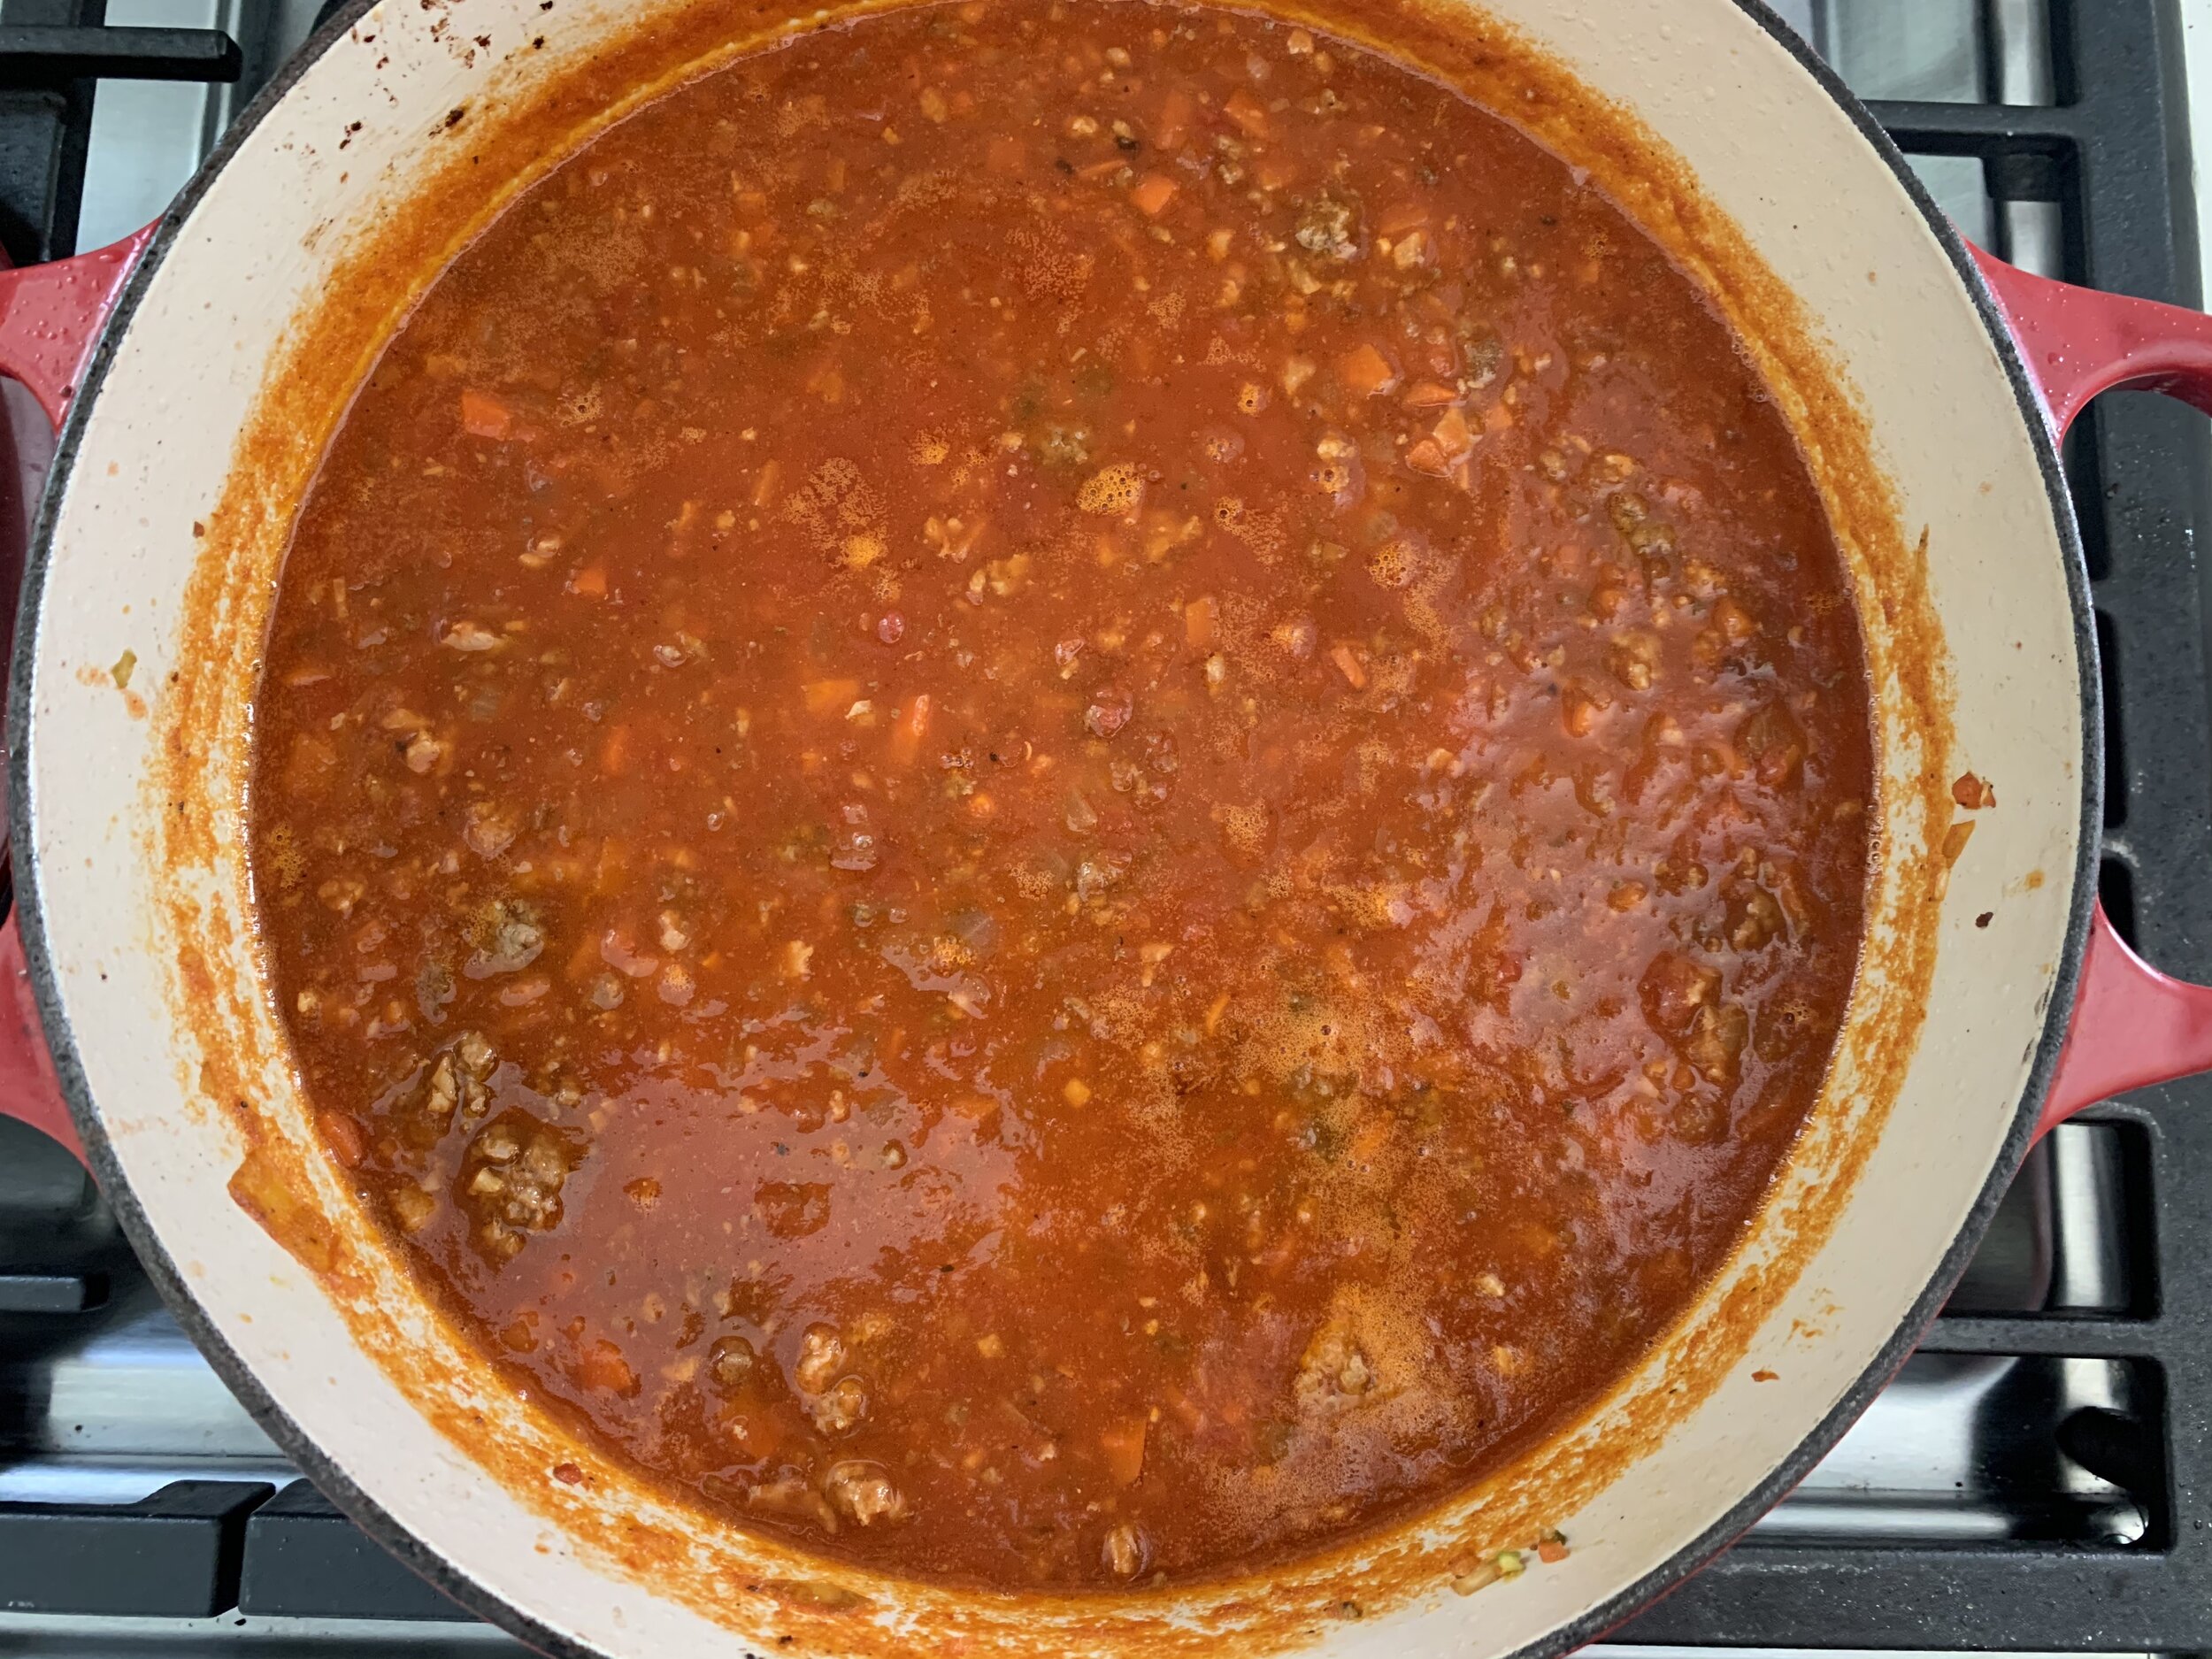 The ragù before it goes in the oven